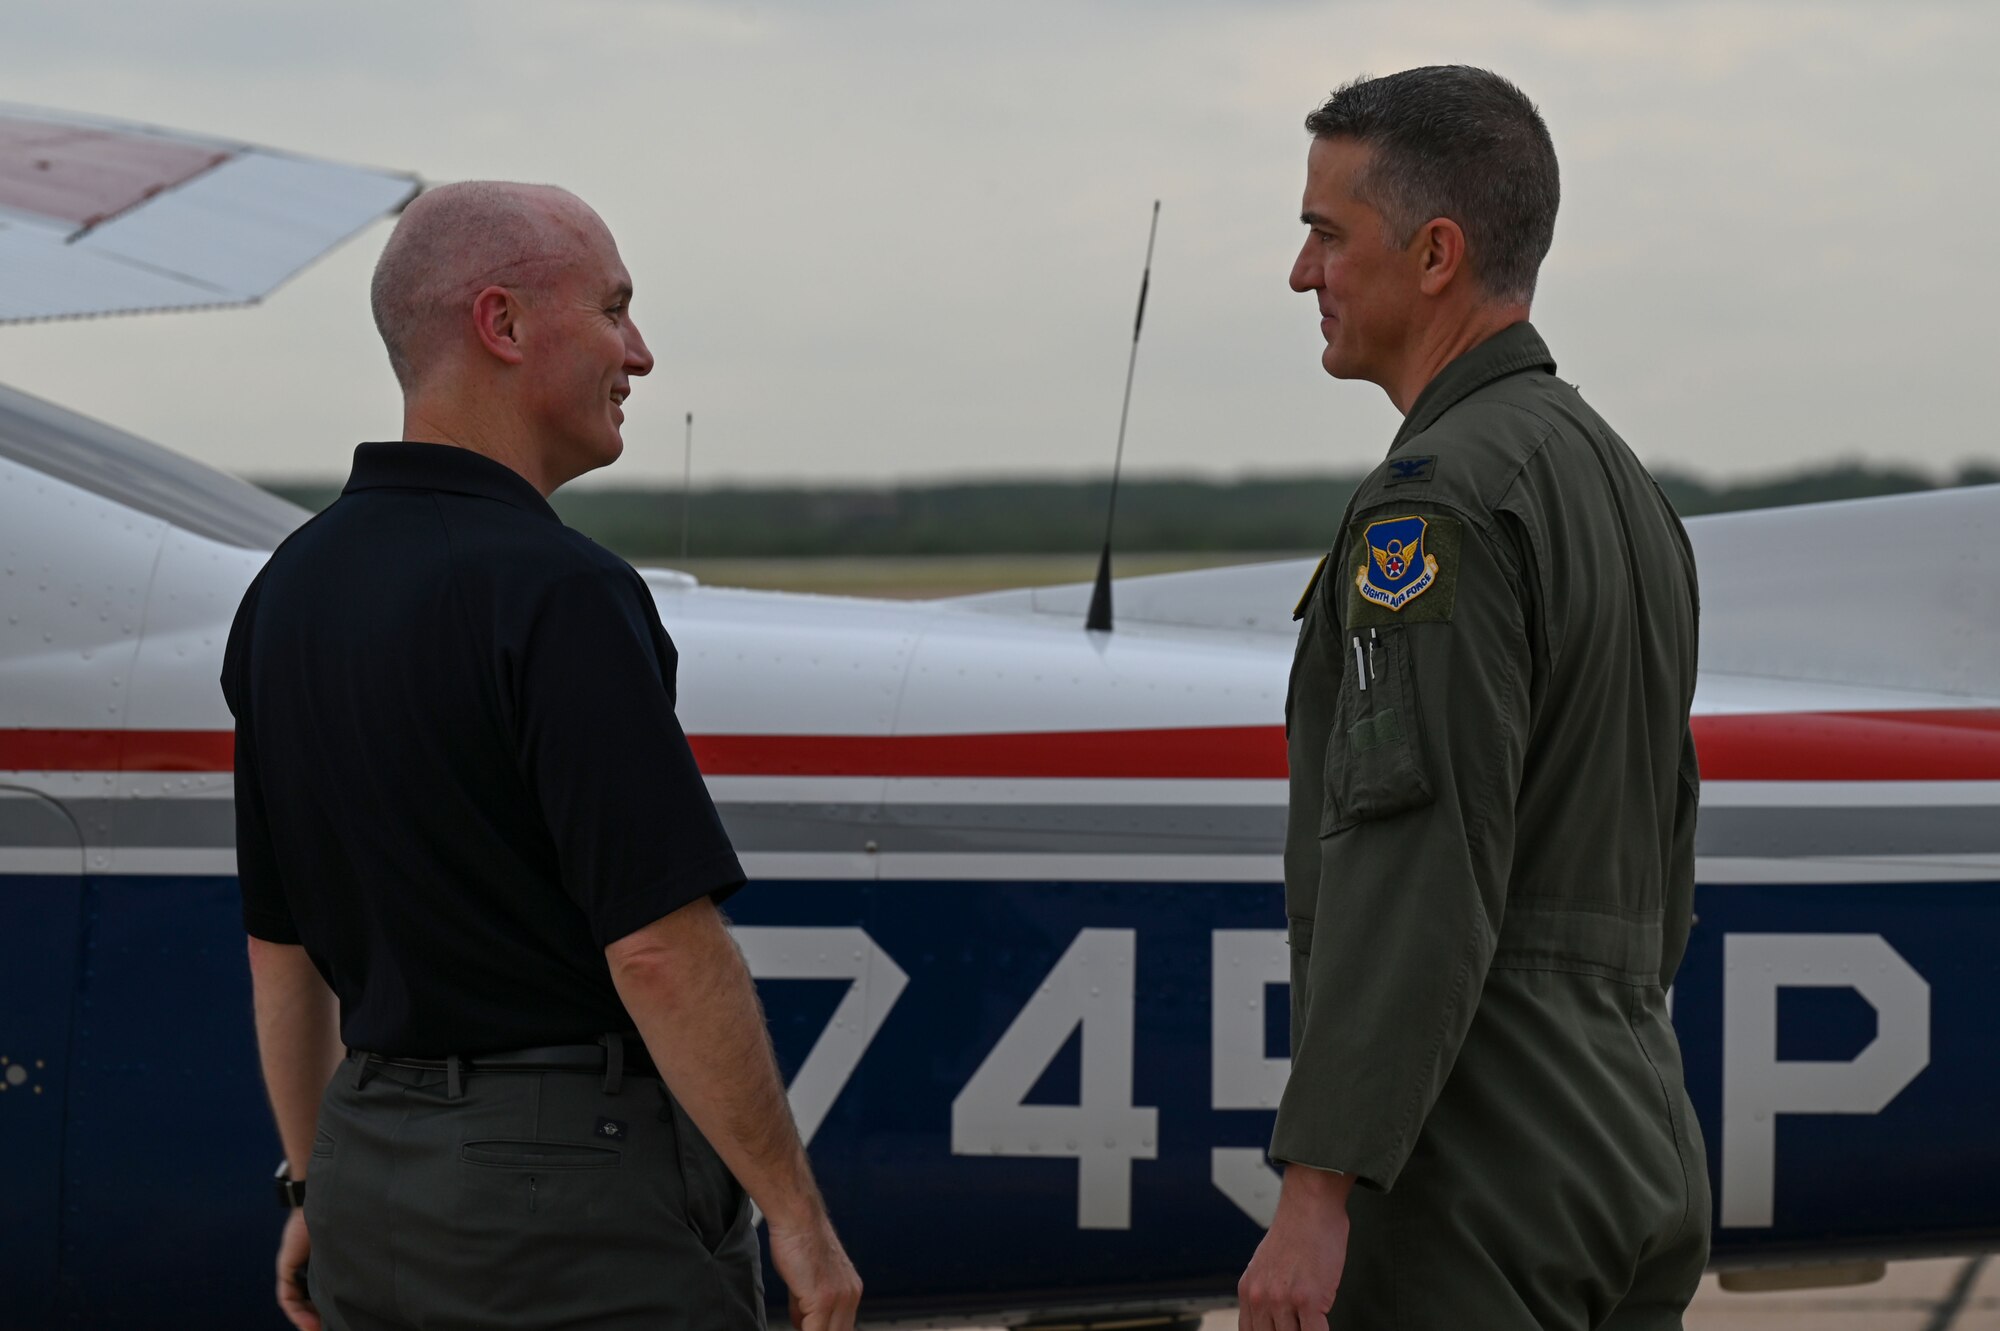 Col. Aaron Oliver, Oklahoma Wing Civil Air Patrol commander, talks with Col. Samuel Friend, 7th Bomb Wing deputy commander, after landing at Dyess Air Force Base, Texas, Sept. 21, 2023. The CAP is the civilian auxiliary of the U.S. Air Force, dedicated to providing support in emergency services, aerospace and cadet programs. (U.S. Air Force photo by Senior Airman Sophia Robello)